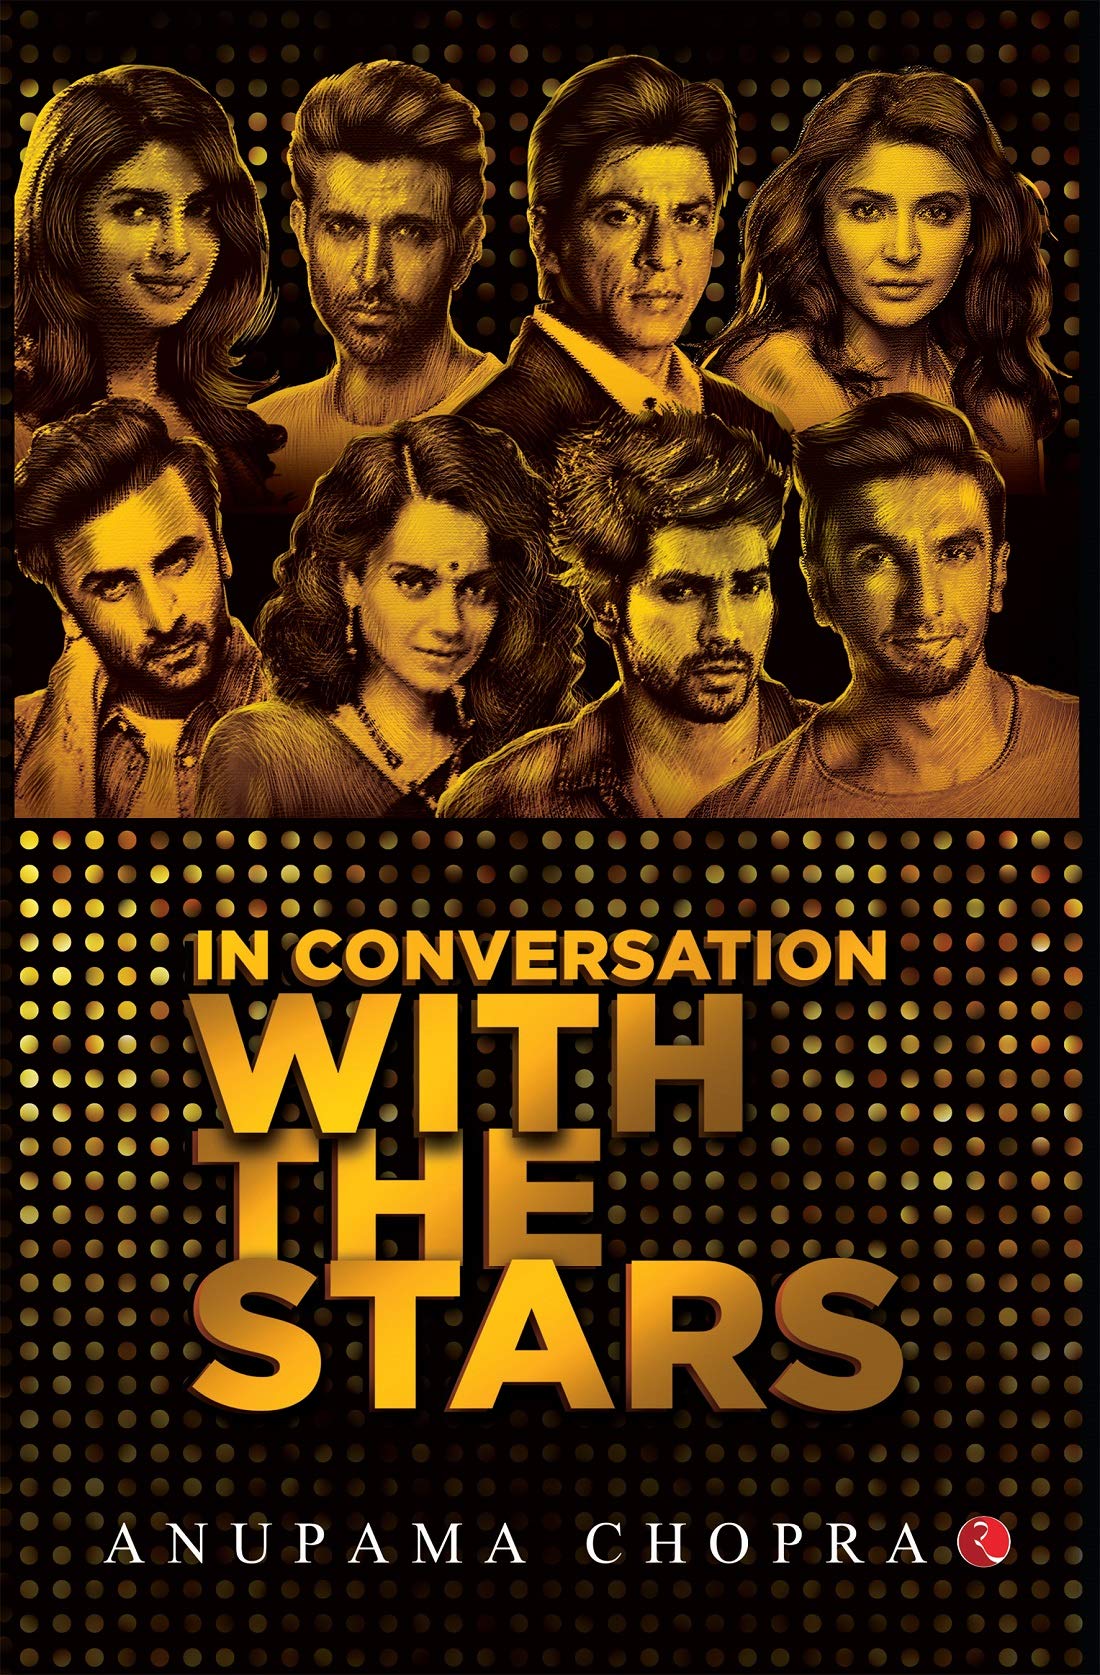 IN CONVERSATIONS WITH THE STARS